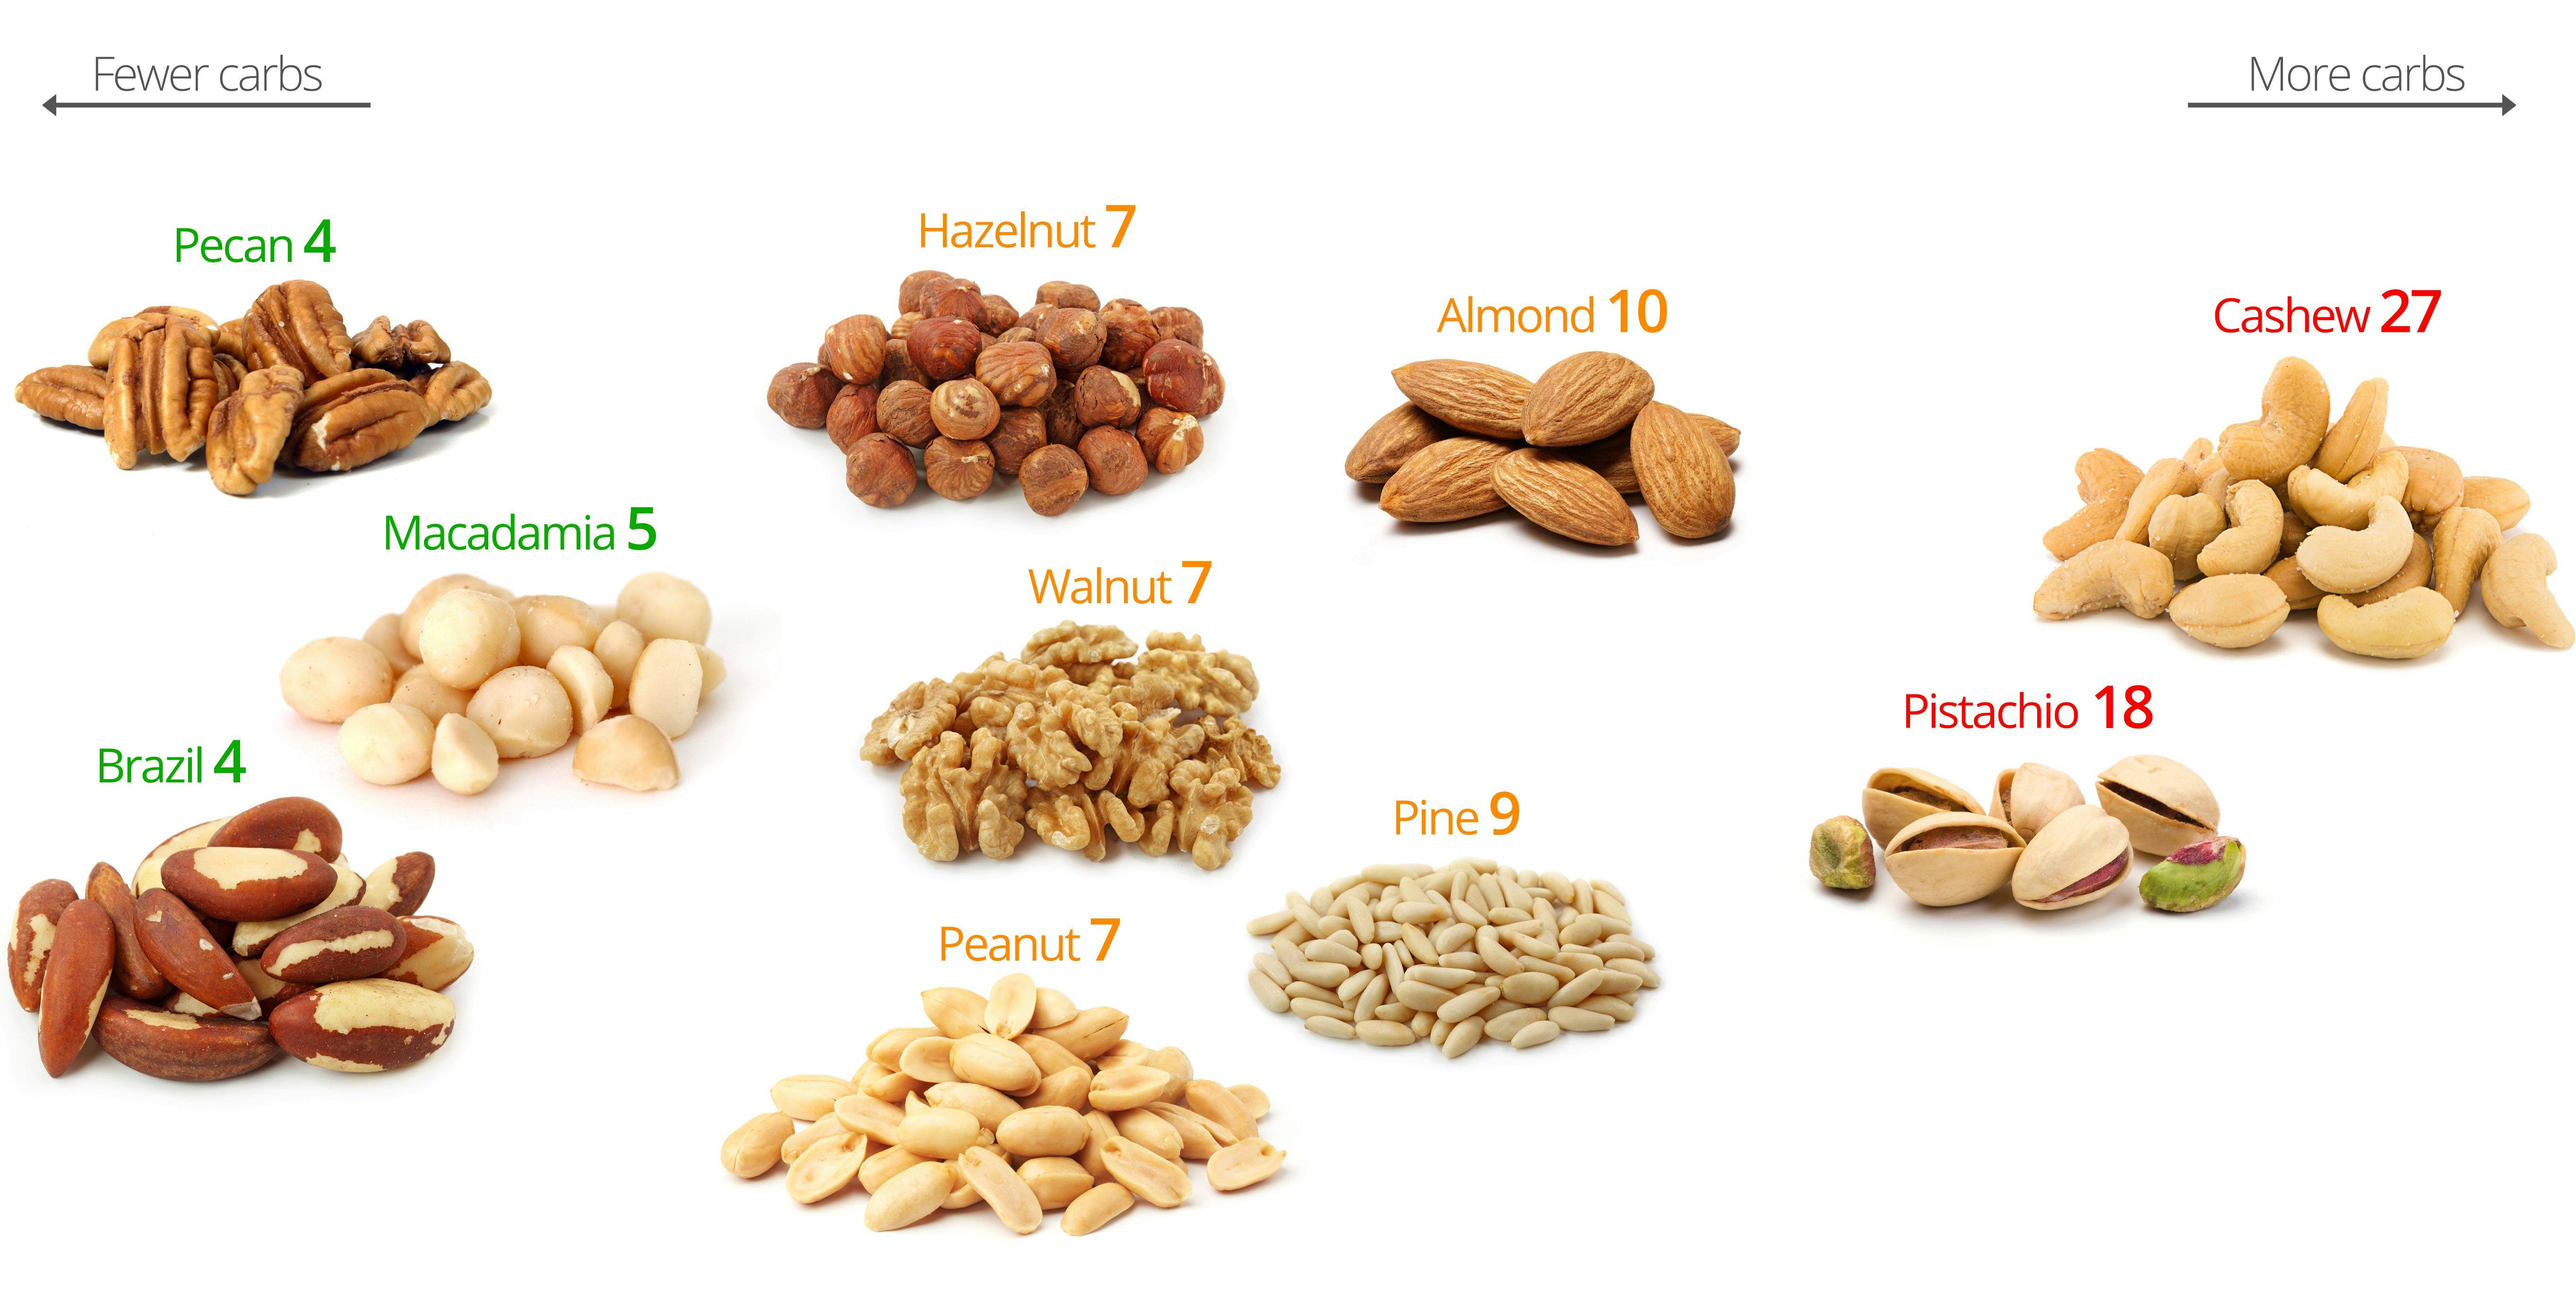 Calories In Nuts Chart